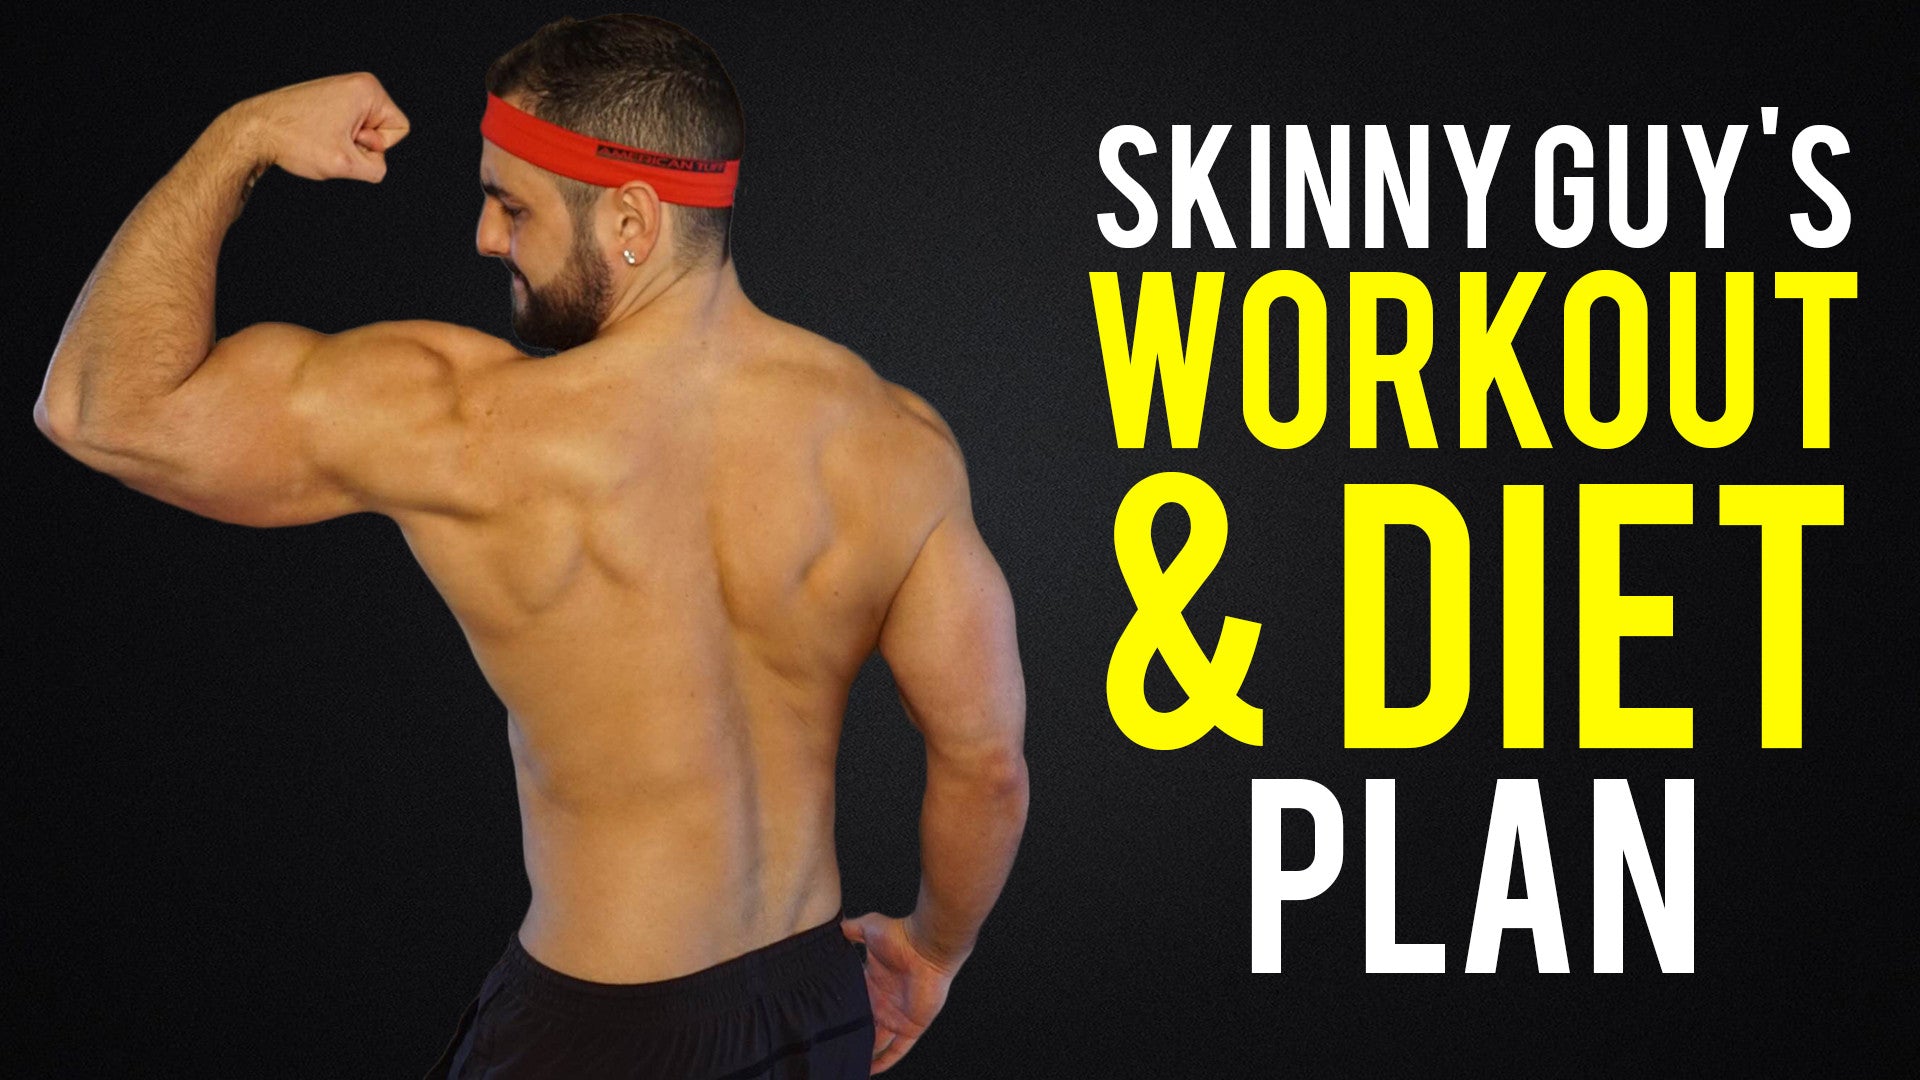 5 Day How To Workout For Skinny Guys for push your ABS